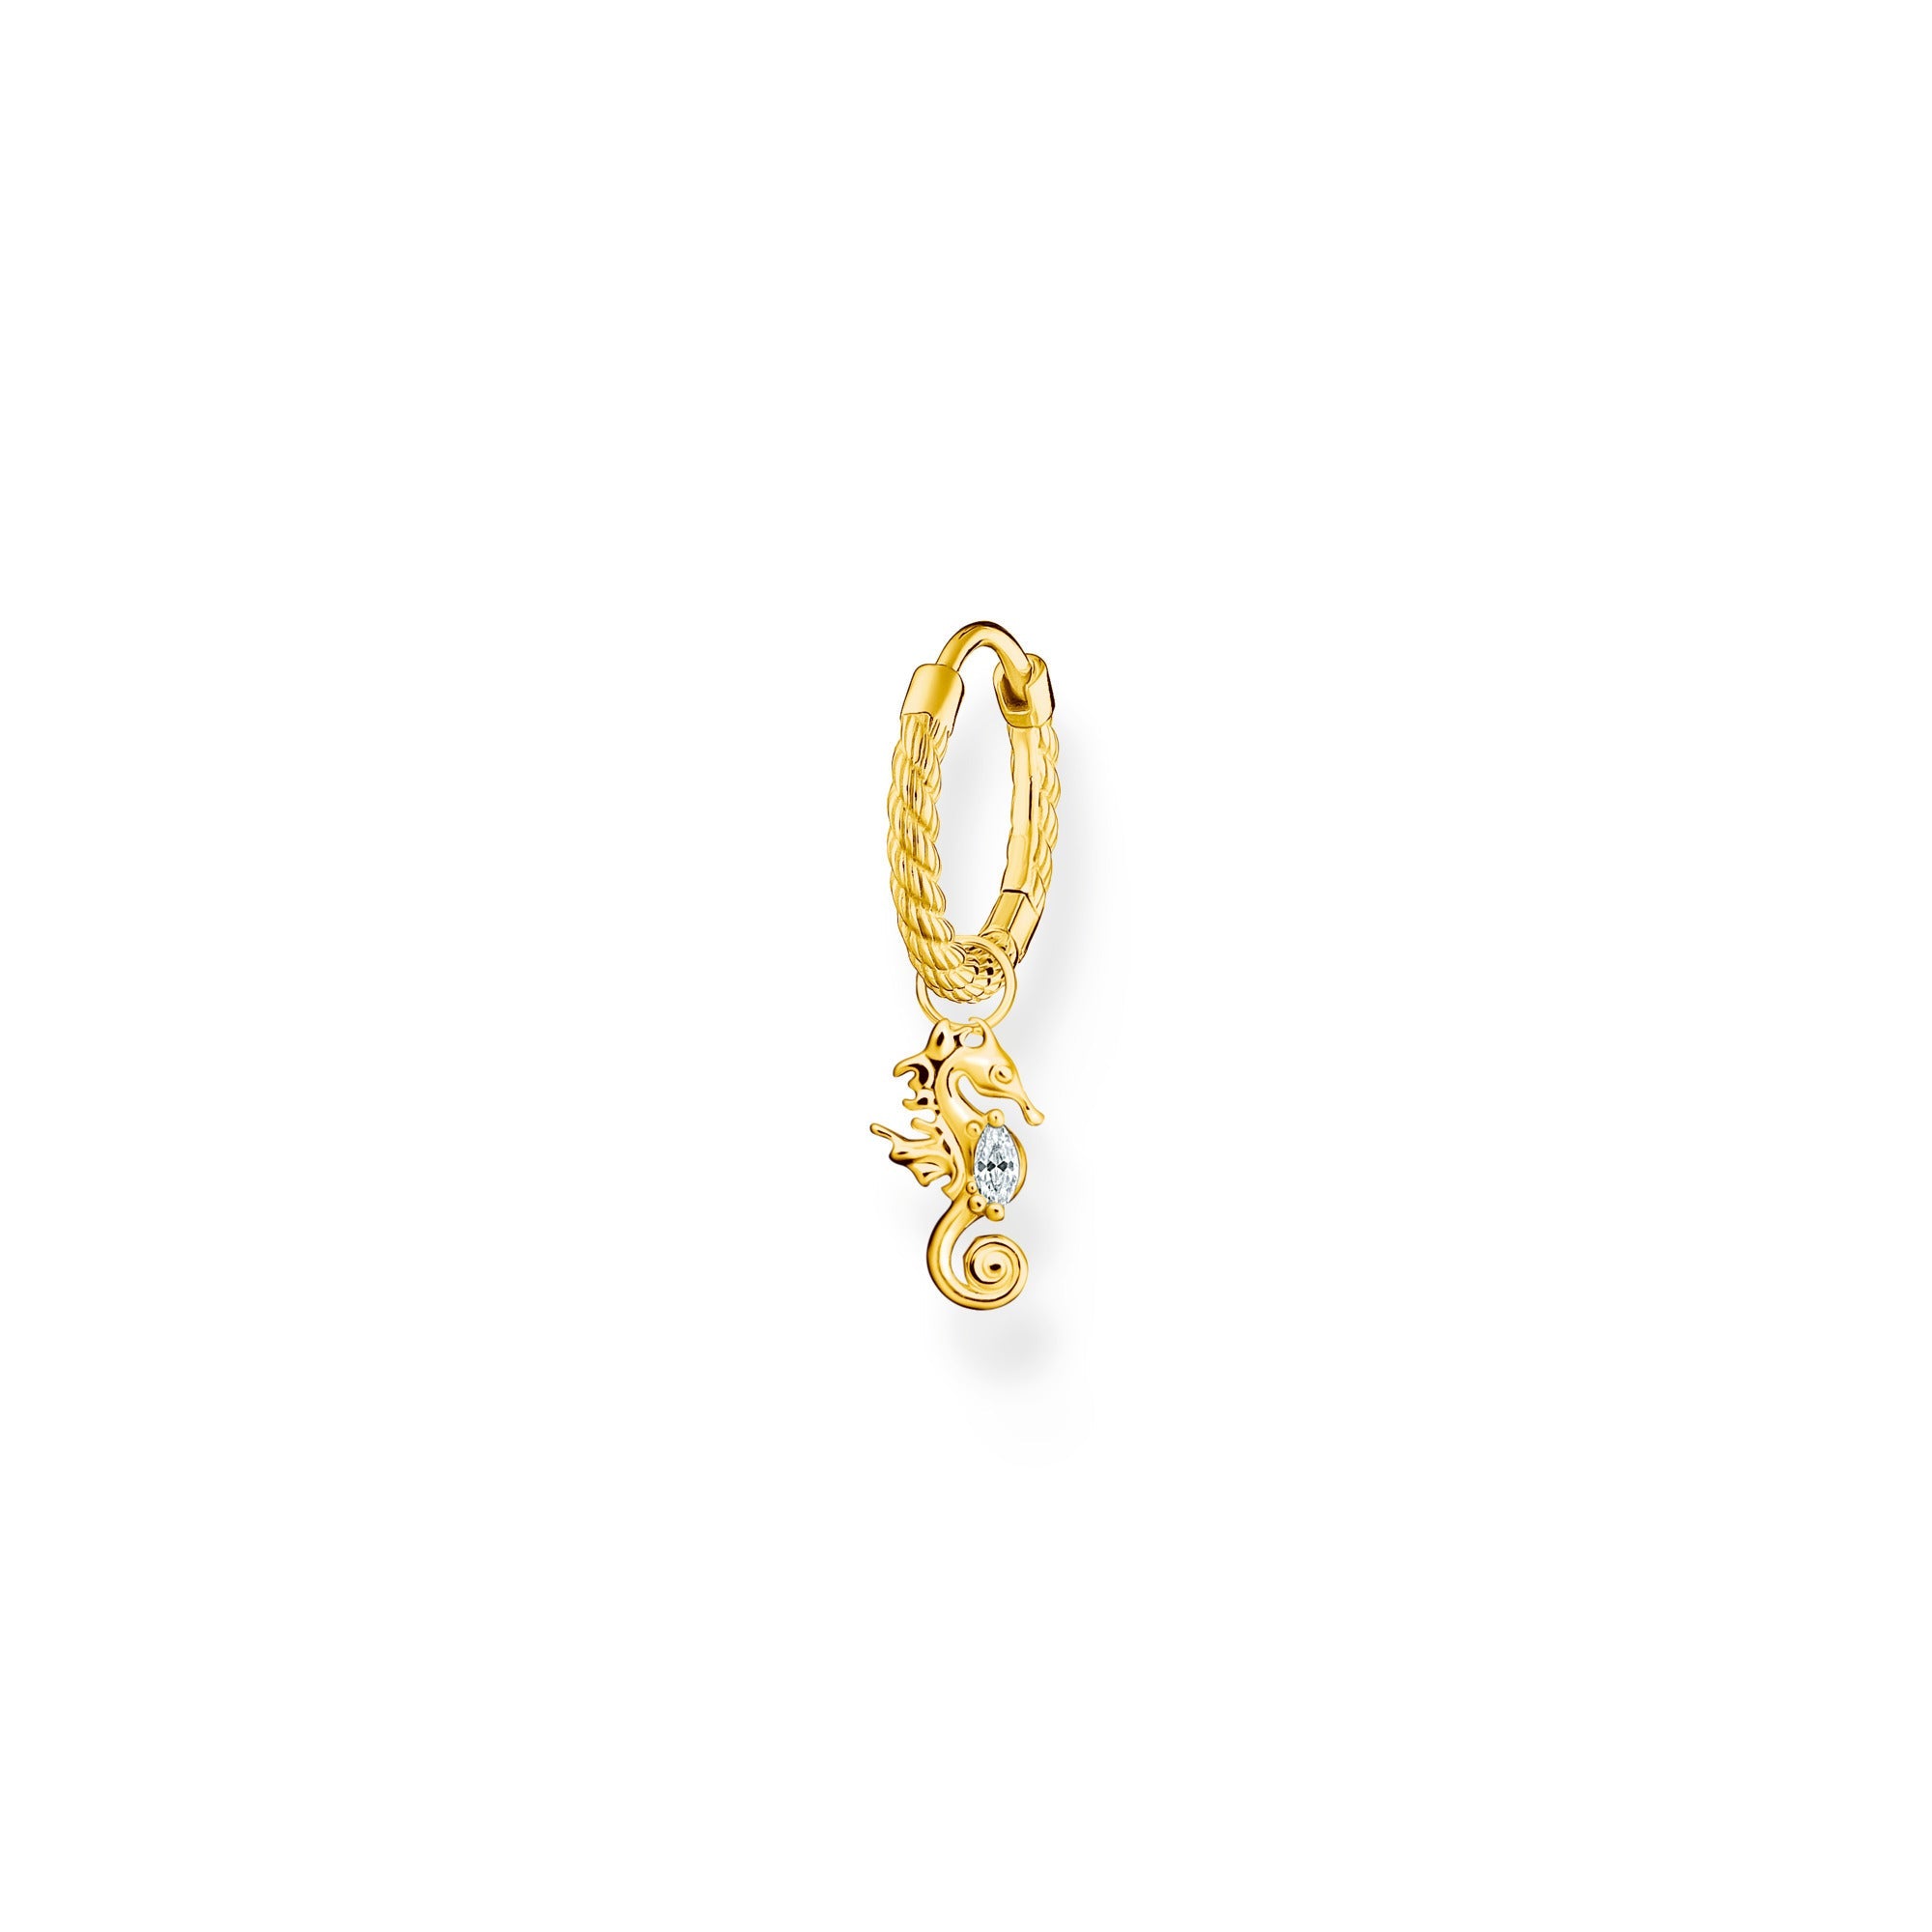 Thomas Sabo Charm Club Yellow Gold Plated Sterling Silver Seahorse Hoop Earring